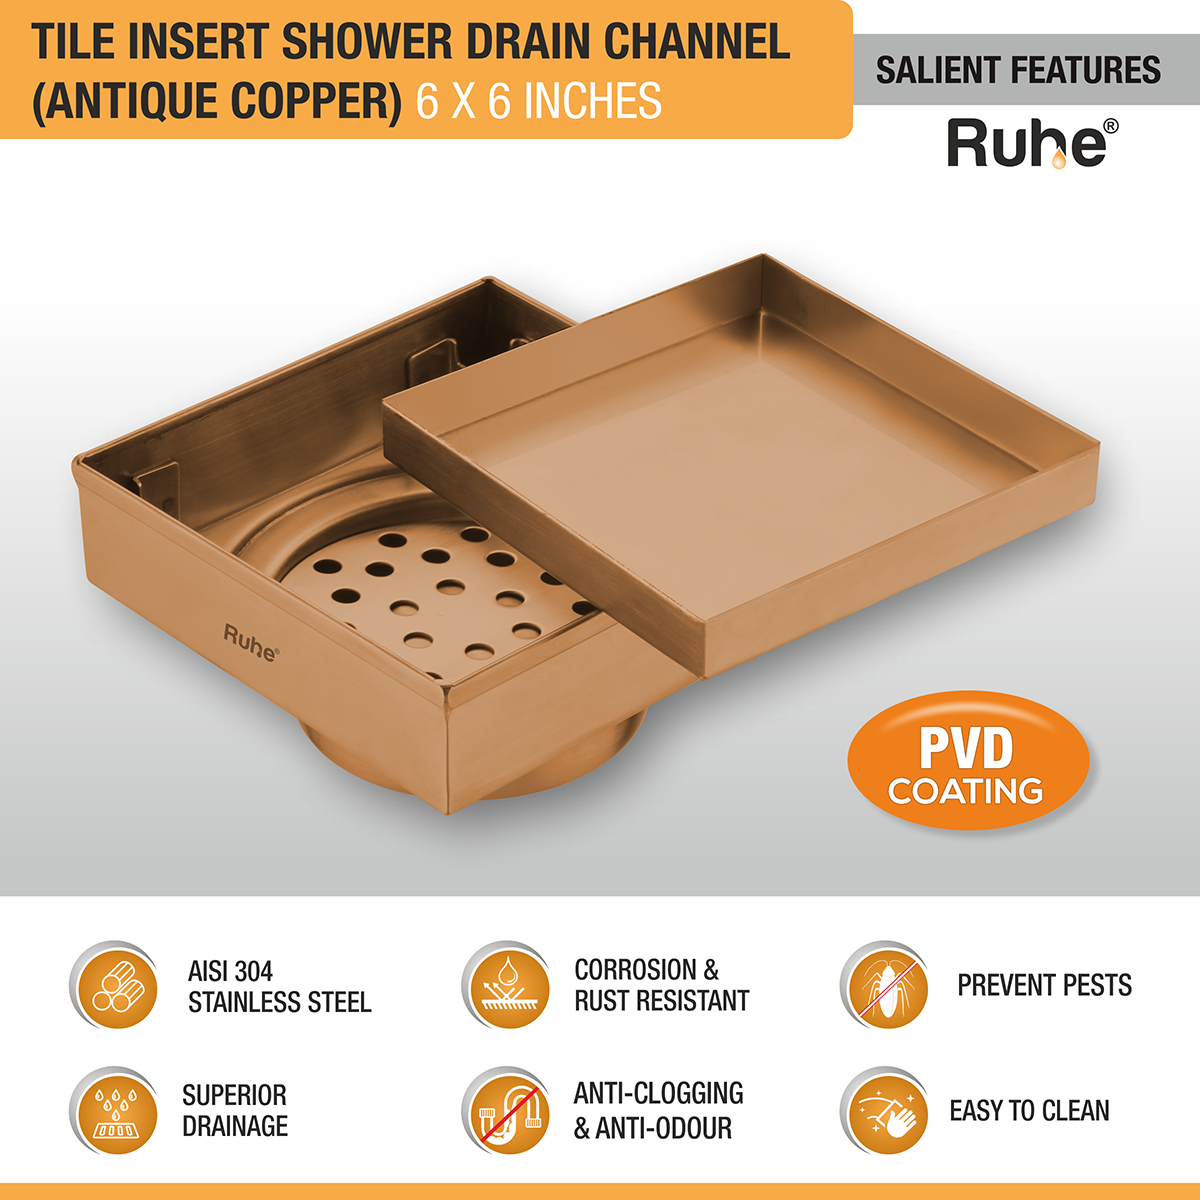 Tile Insert Shower Drain Channel (6 x 6 Inches) ROSE GOLD PVD Coated features and benefits